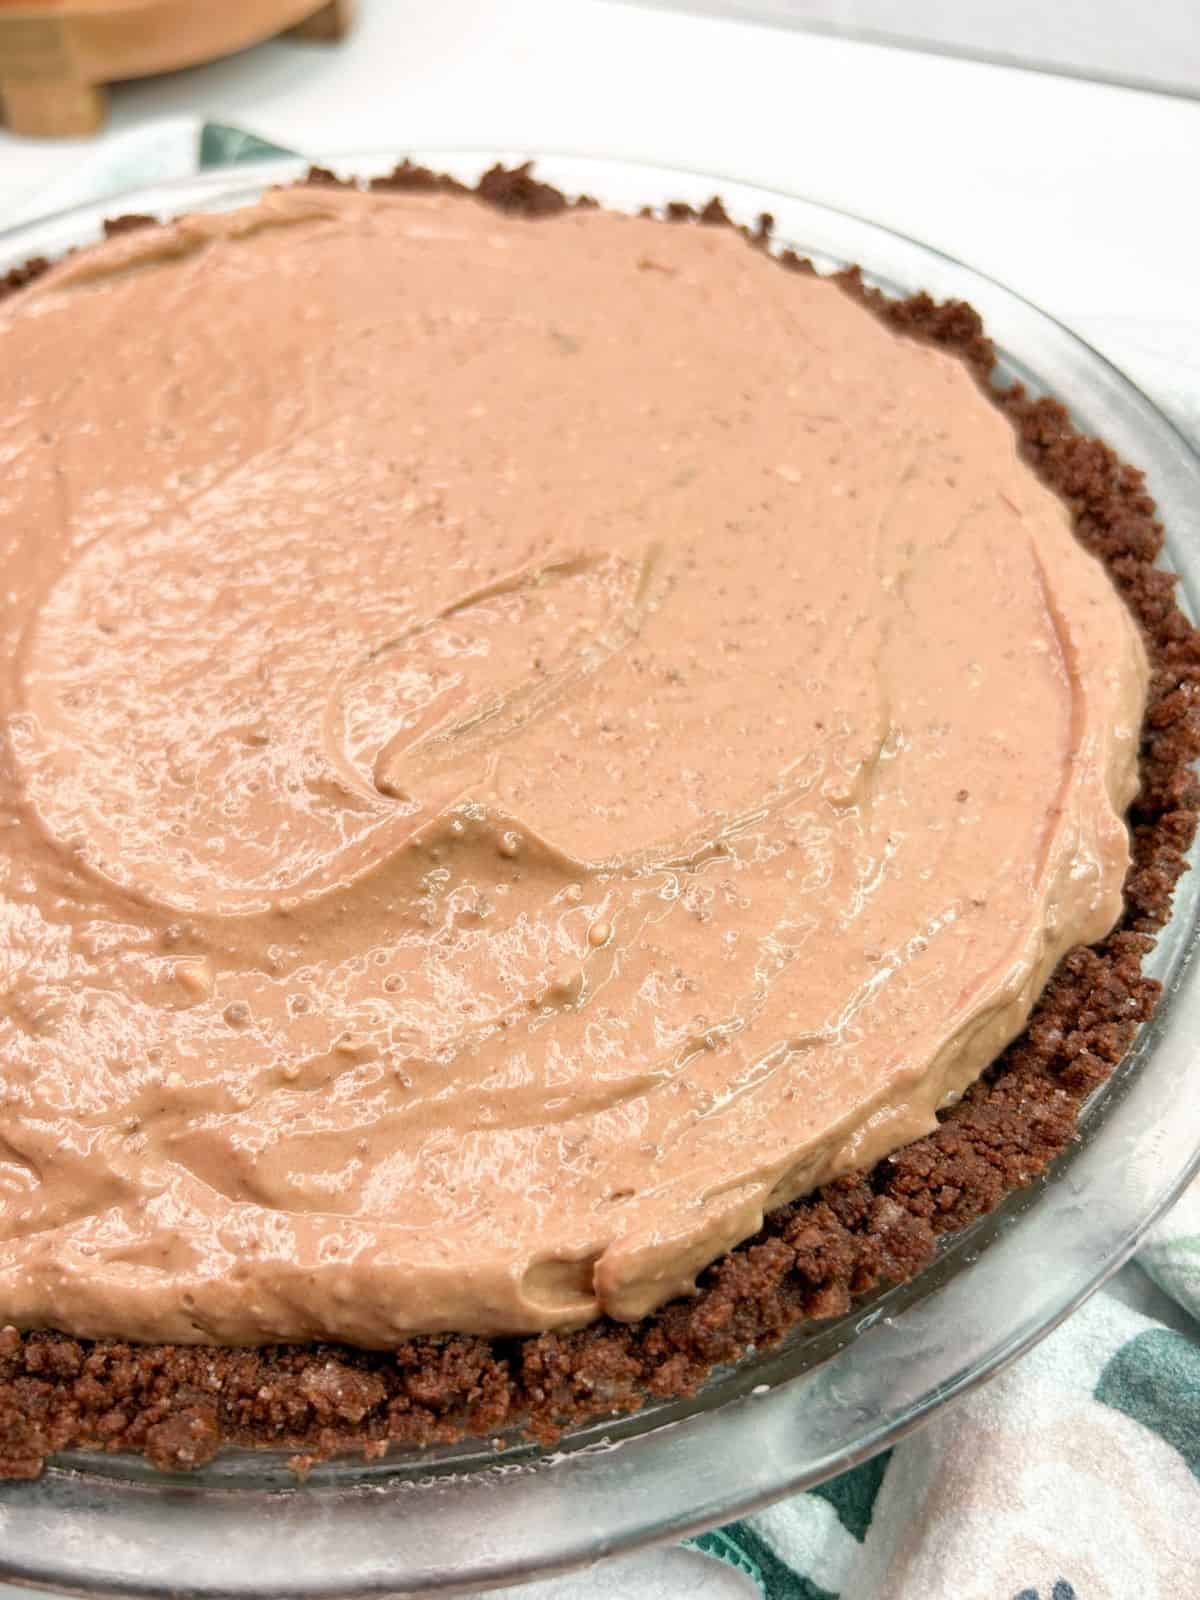 chocolate pudding pie mixture with graham cracker crumbs in pie plate.